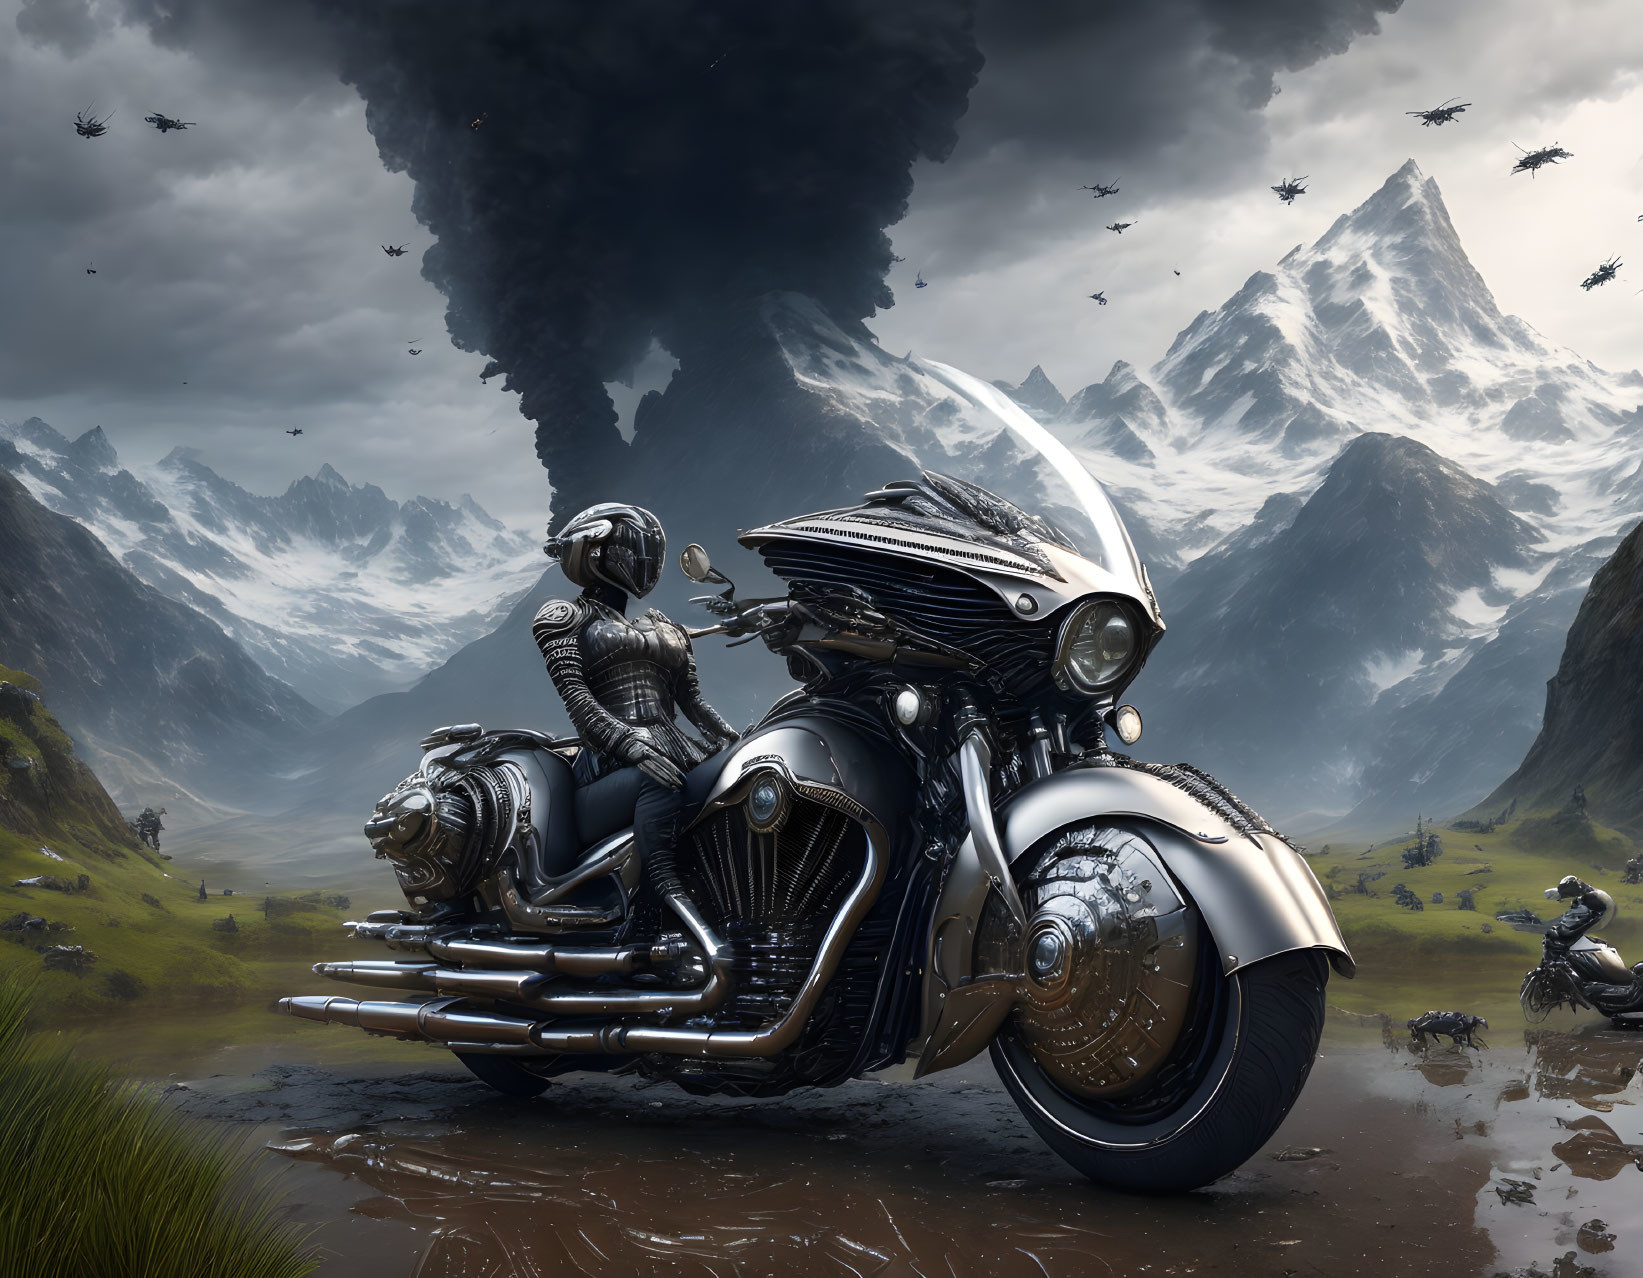 Futuristic motorcycle and rider in dramatic landscape with mountains and flying machines